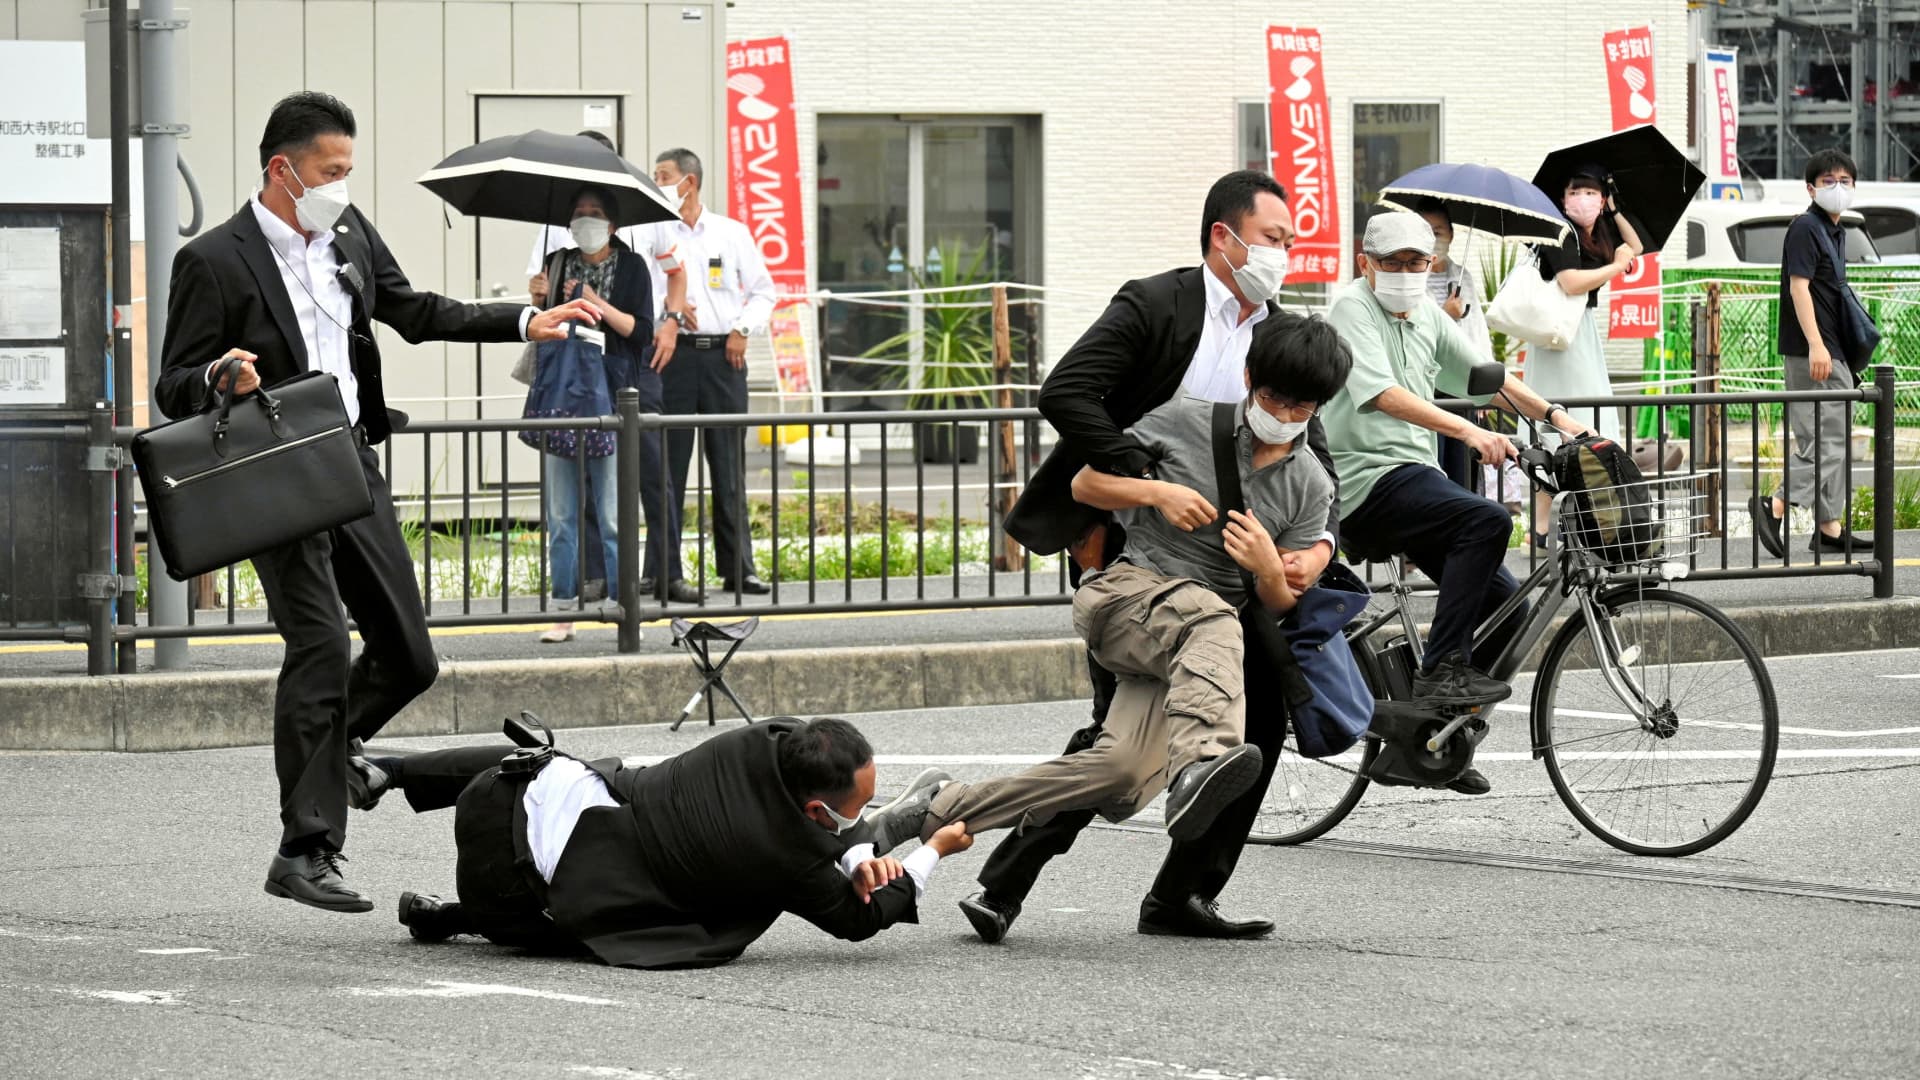 A man, believed to have shot former Japanese Prime Minister Shinzo Abe, is tackled by police officers in Nara, western Japan July 8, 2022 in this photo taken by The Asahi Shimbun. 